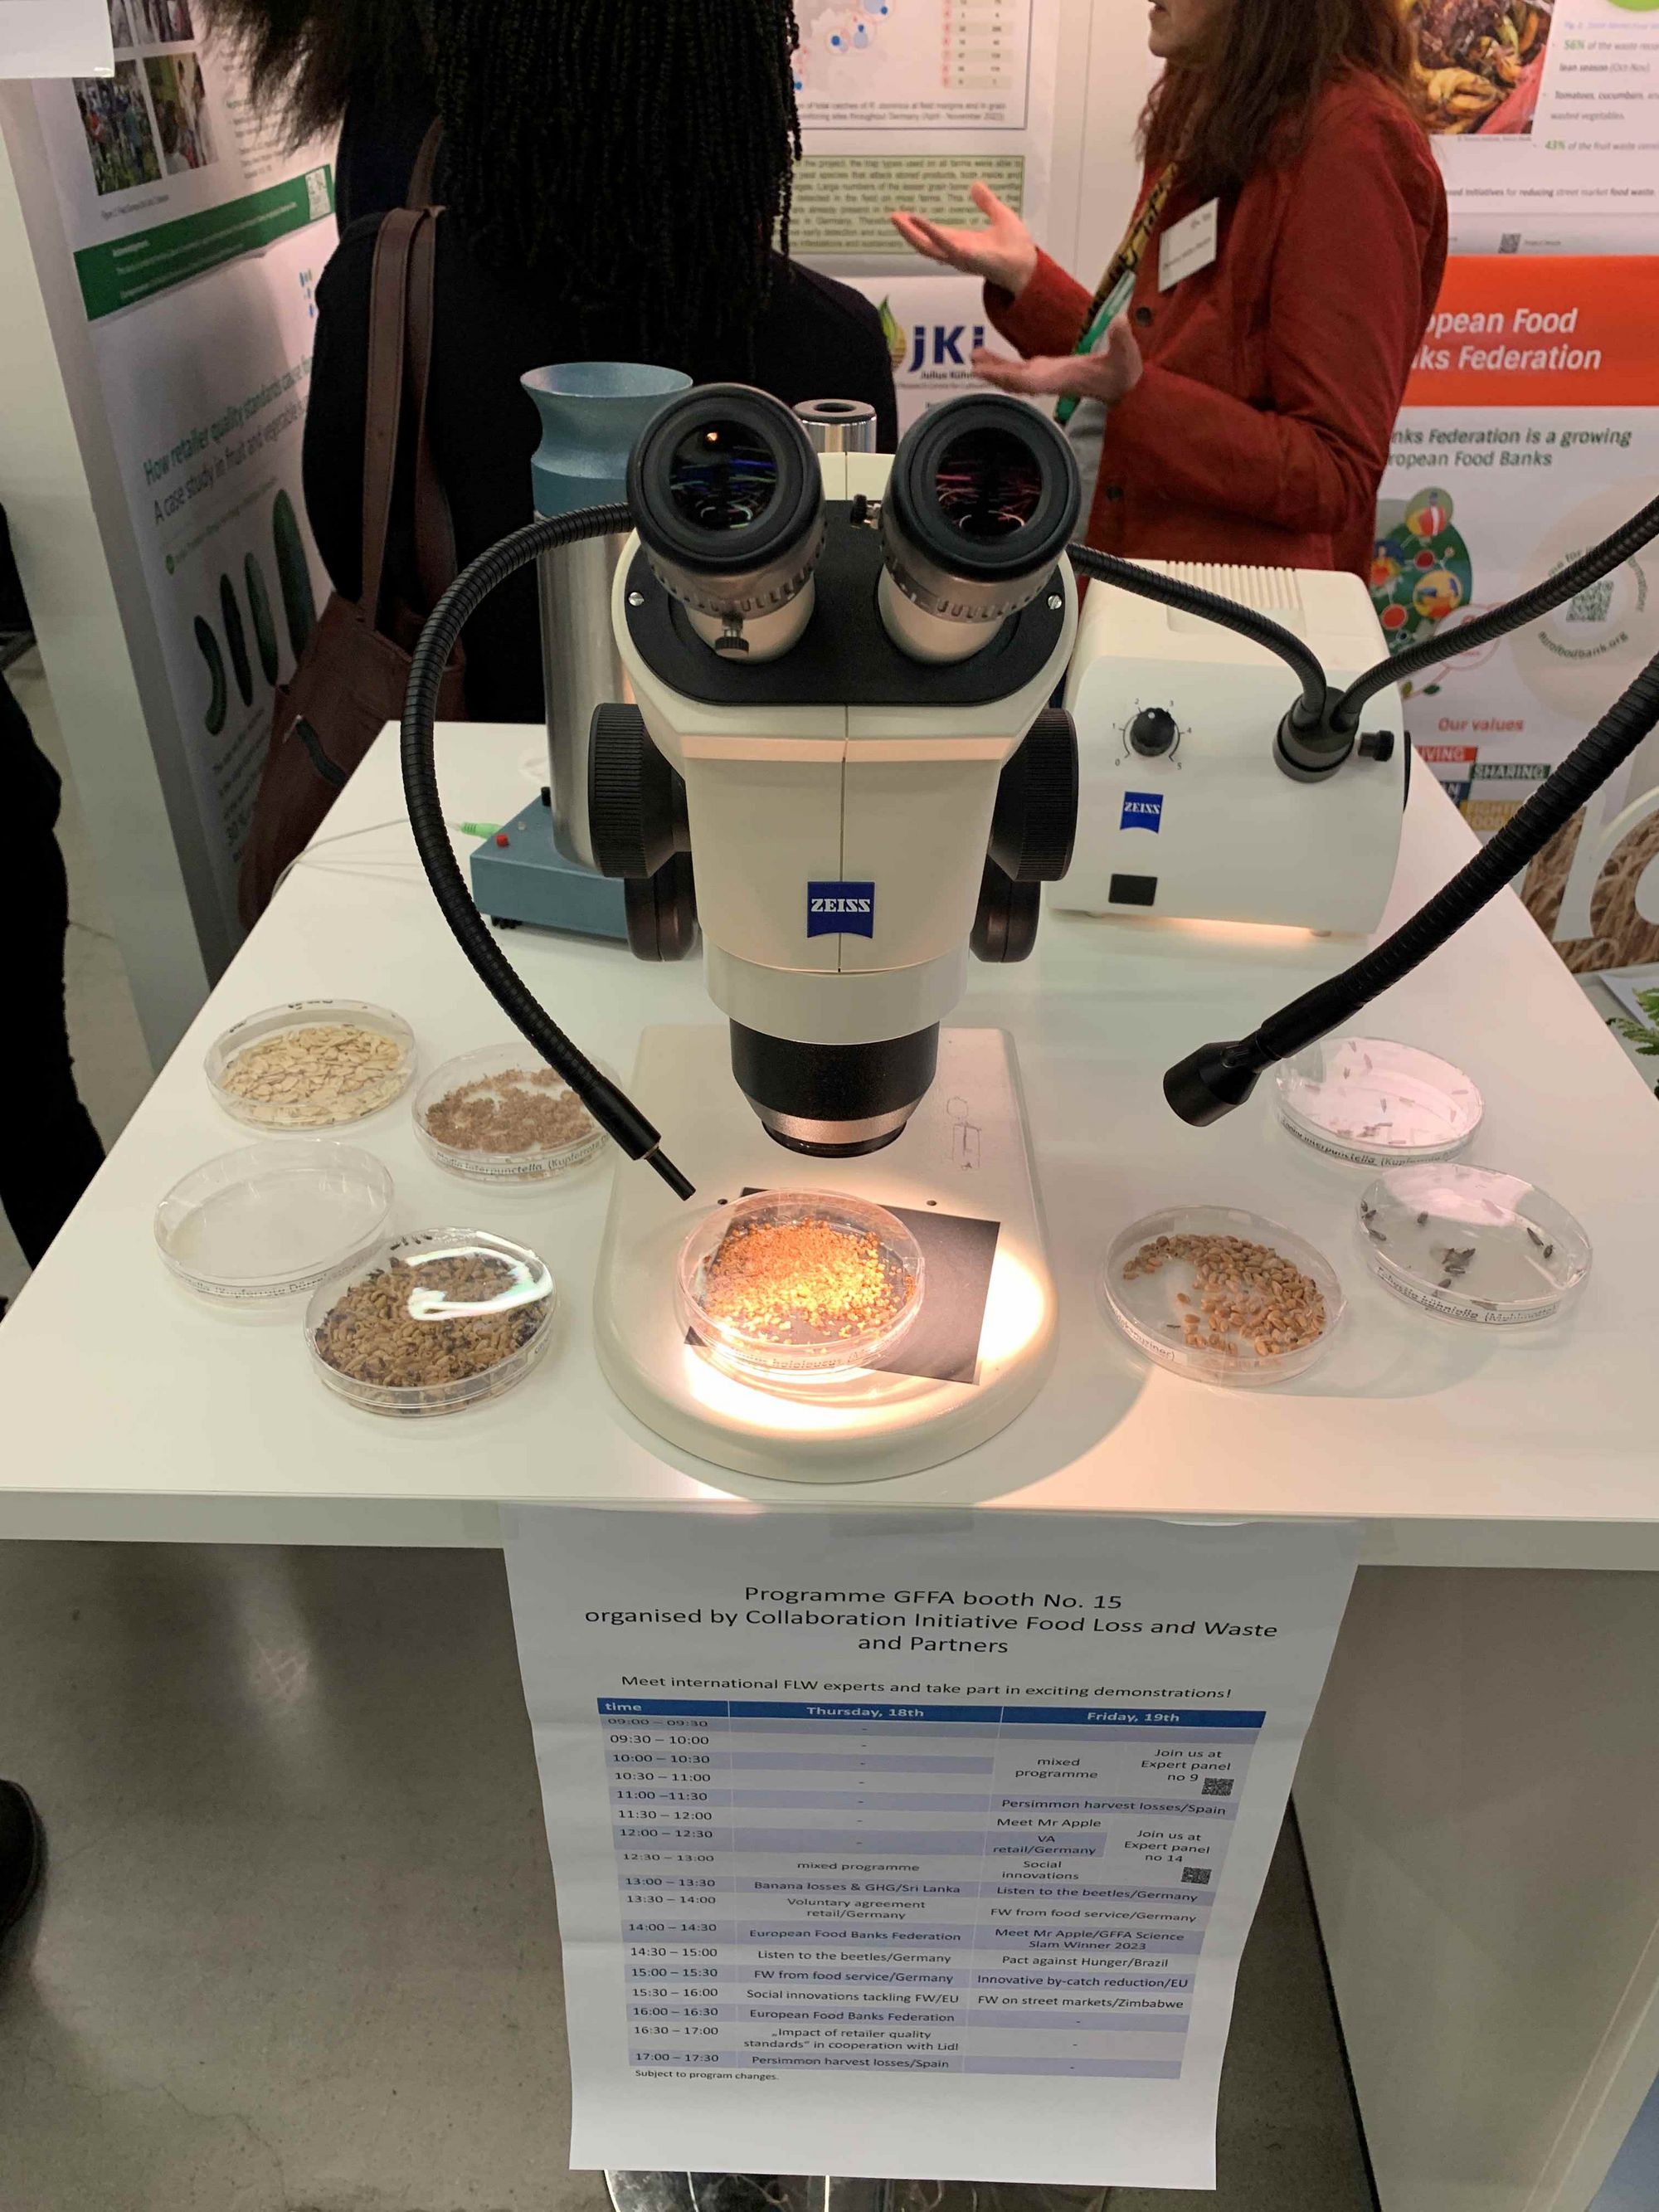 Devices for the optical and acoustic detection of grain pests, provided by our colleagues from the Julius Kühn Institute at the GFFA 2024 exhibition booth.